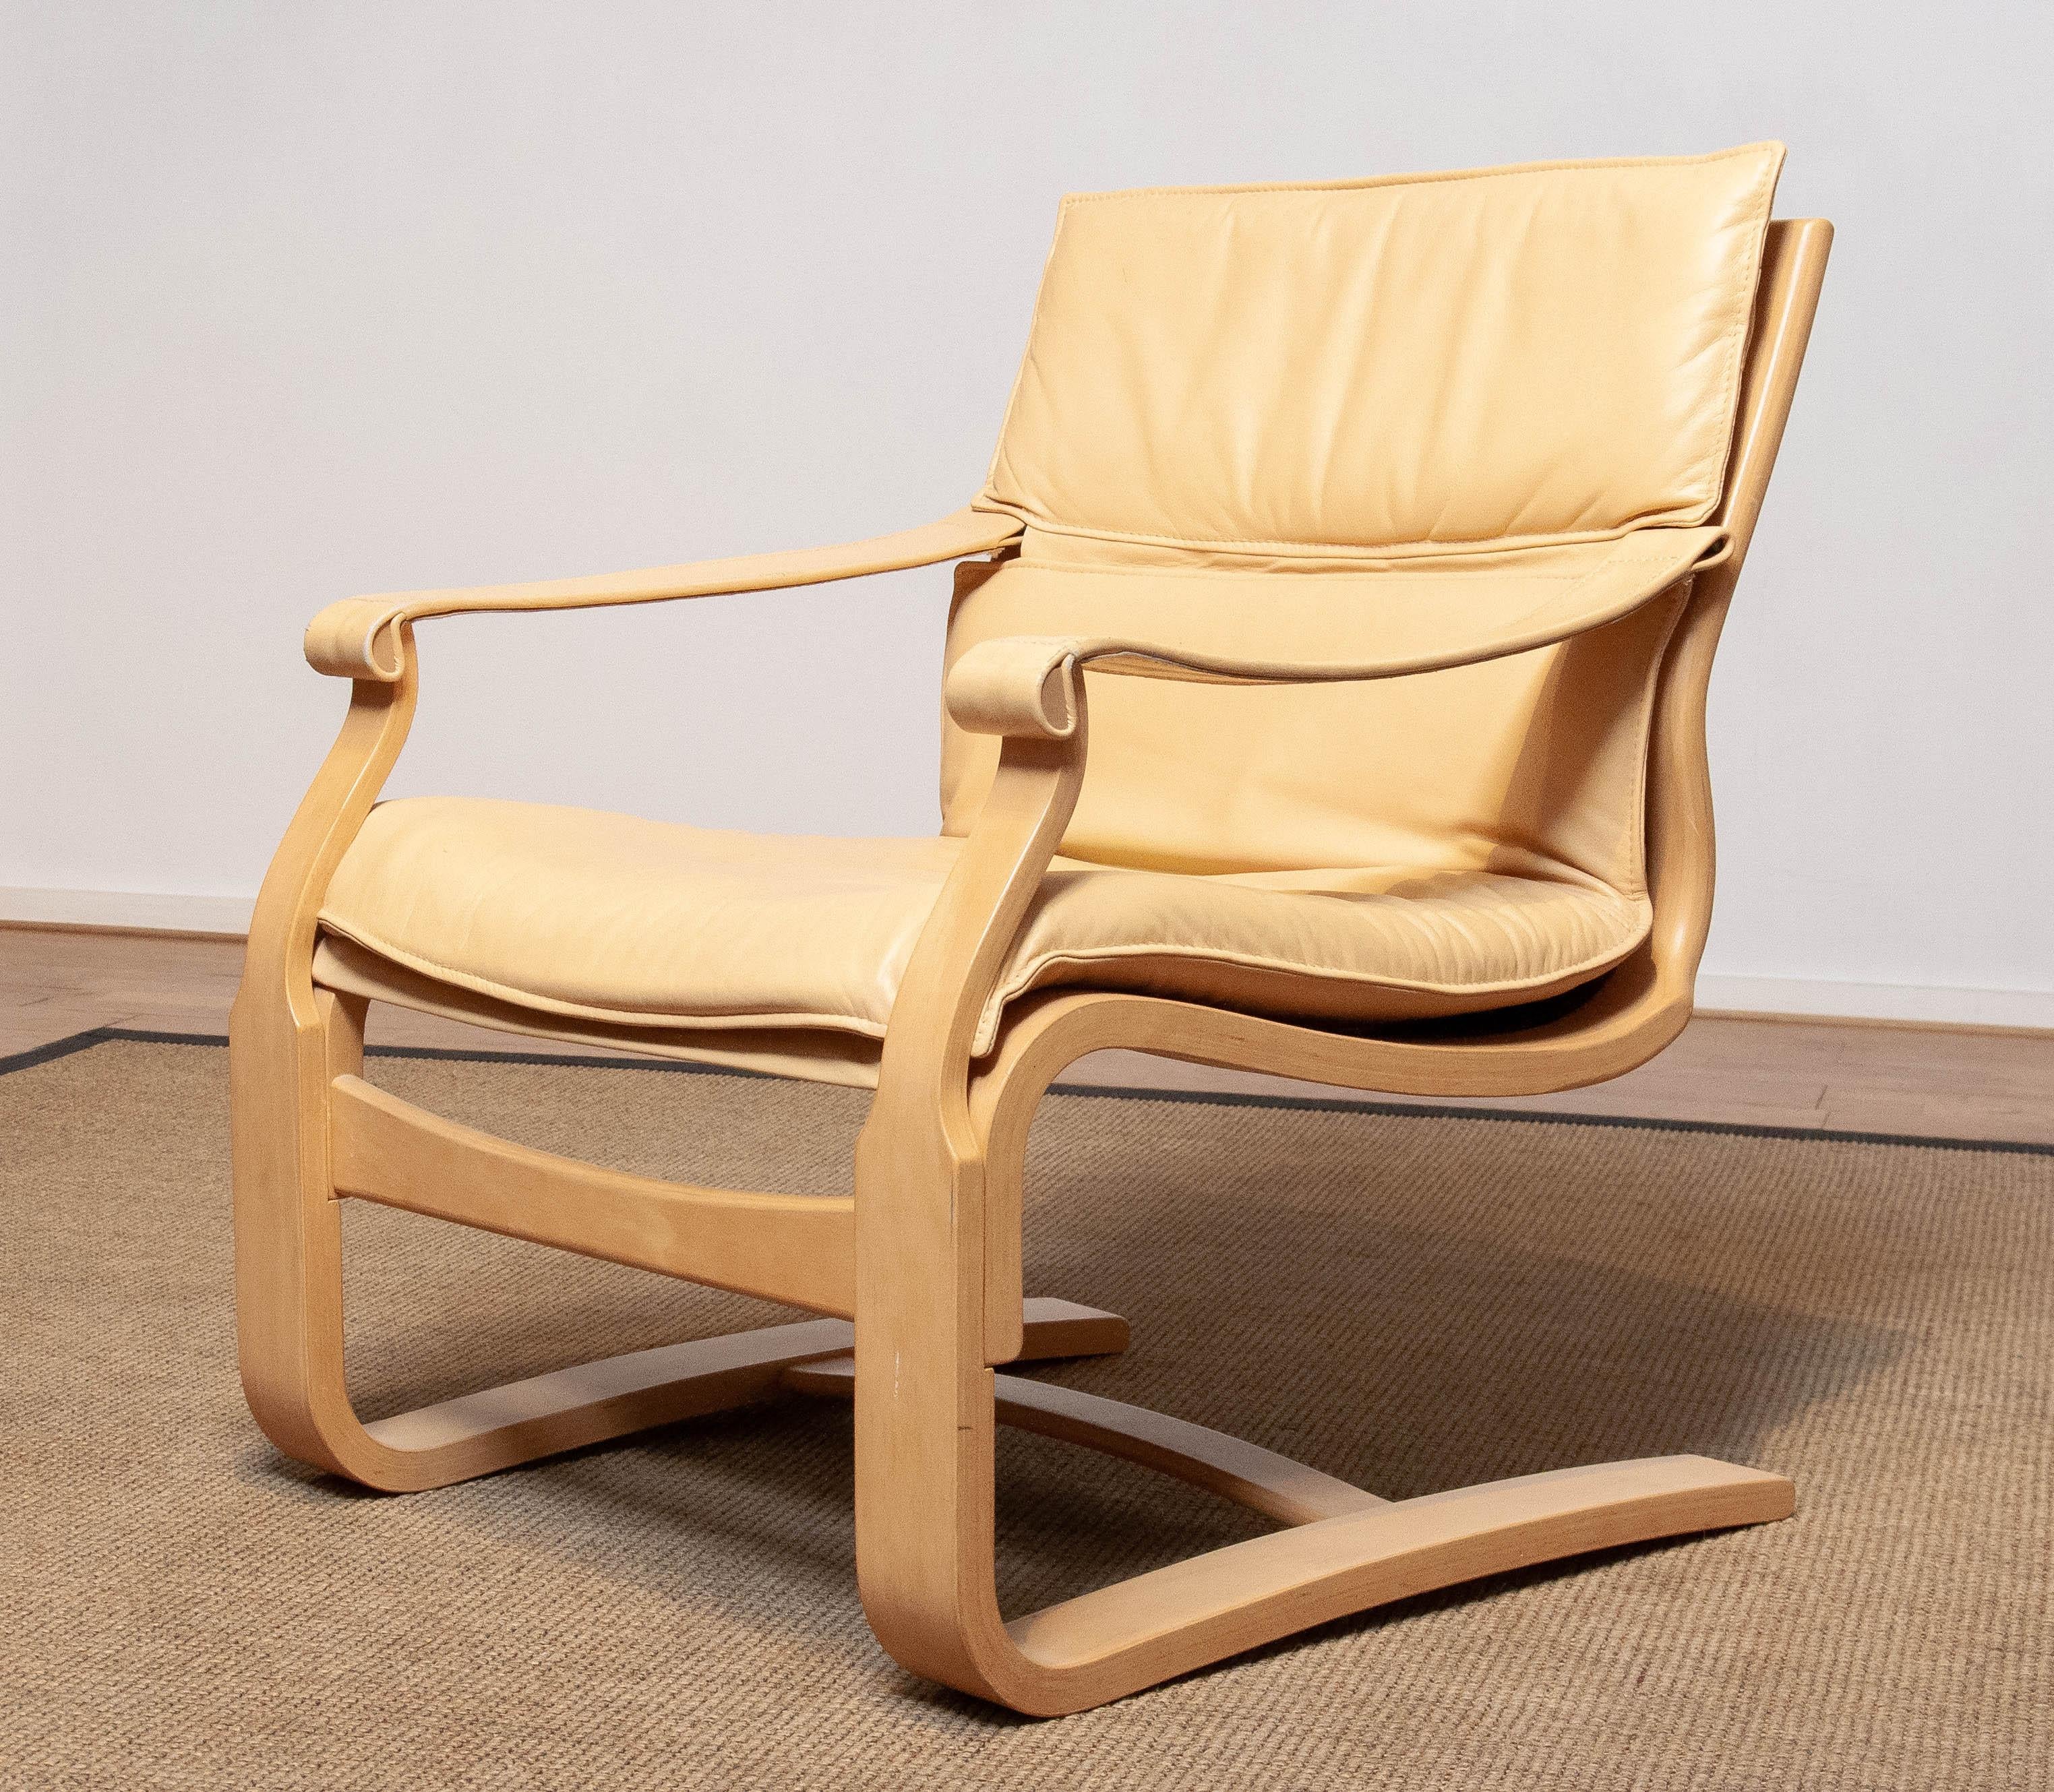 Scandinavian Modern beech bentwood lounge chair designed by Ake Fribytter and manufactured by Nelo in the 1970's upholstered with beige / creme leather and in allover good and very comfortable condition.
Please note that we have two chairs in our